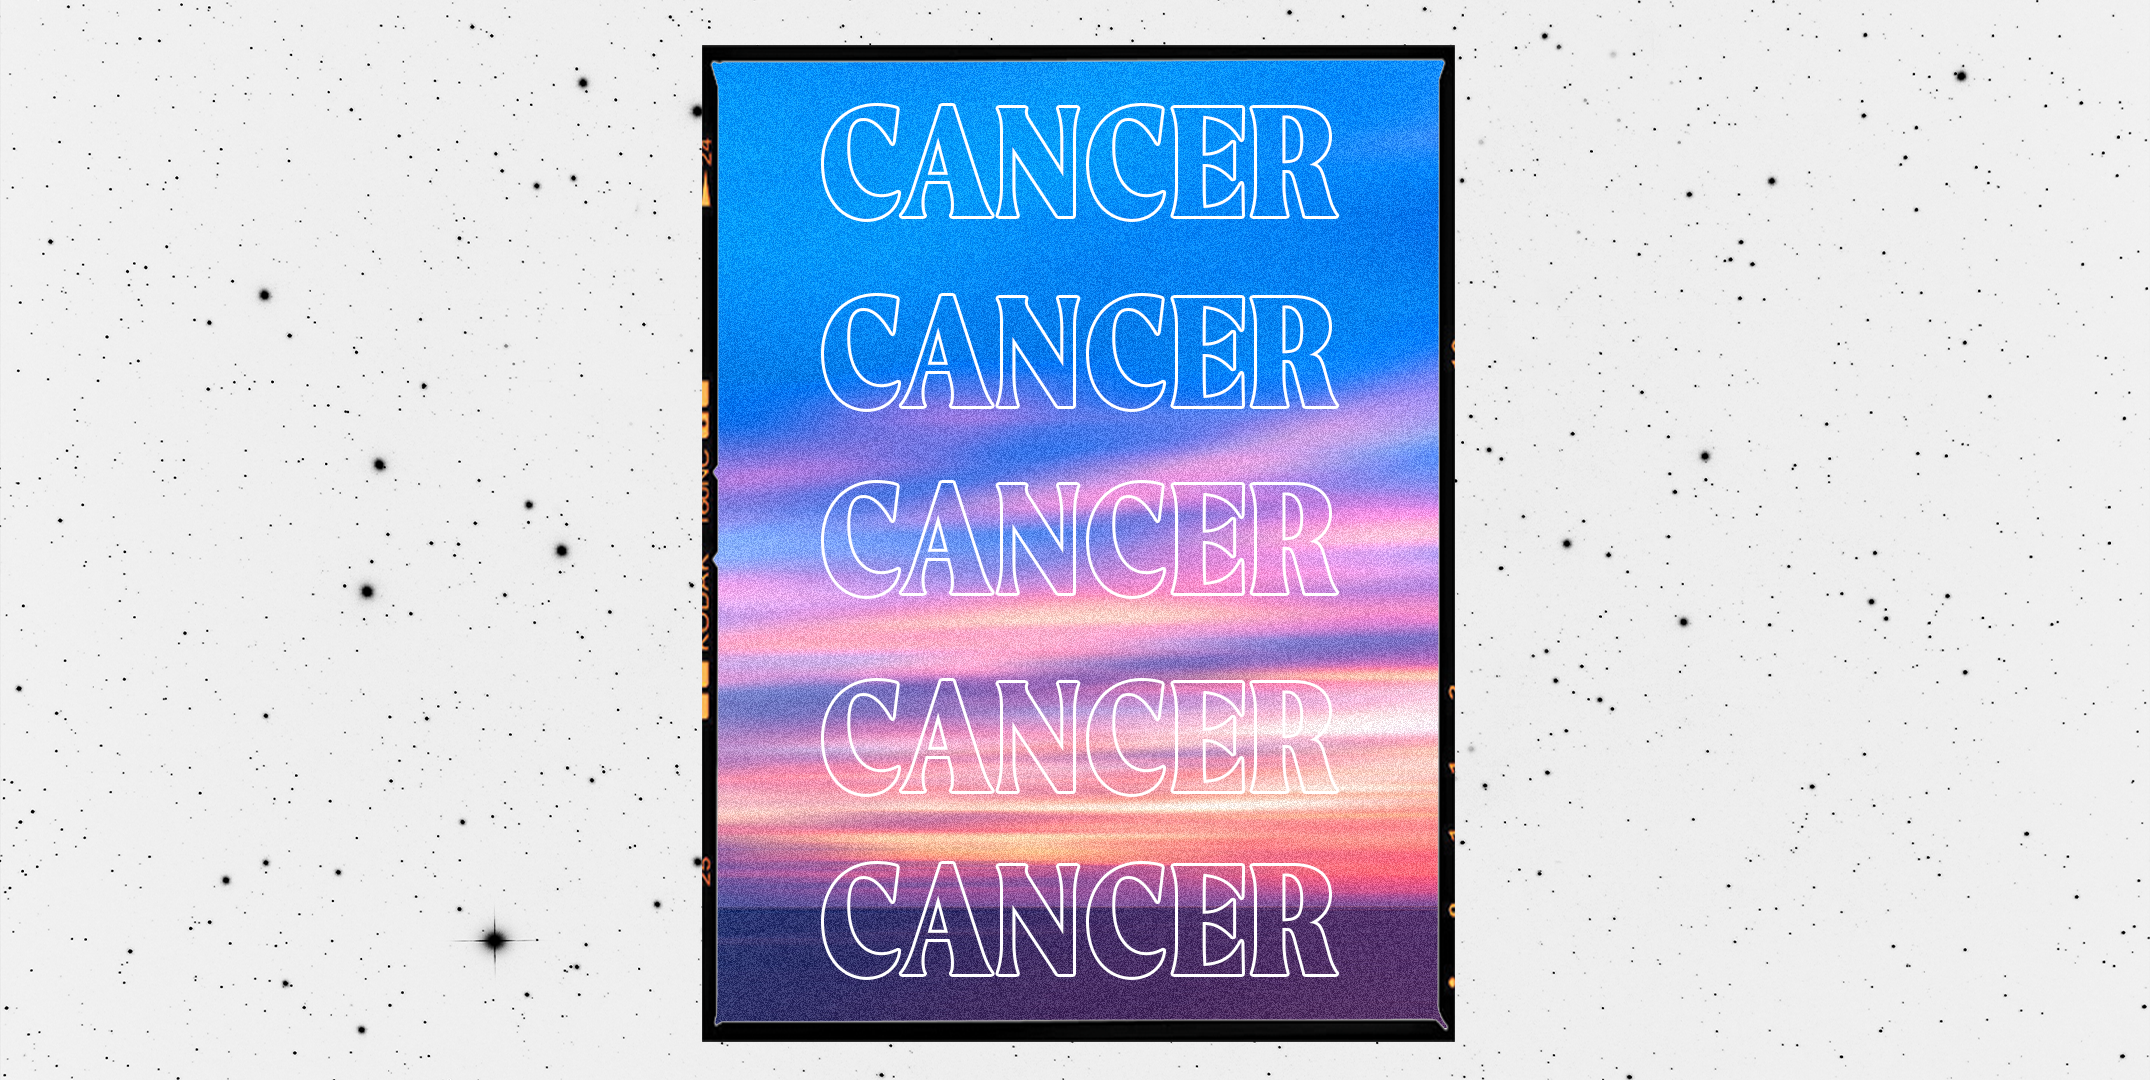 Cancer Woman Personality Traits and Characteristics, Dating a Cancer